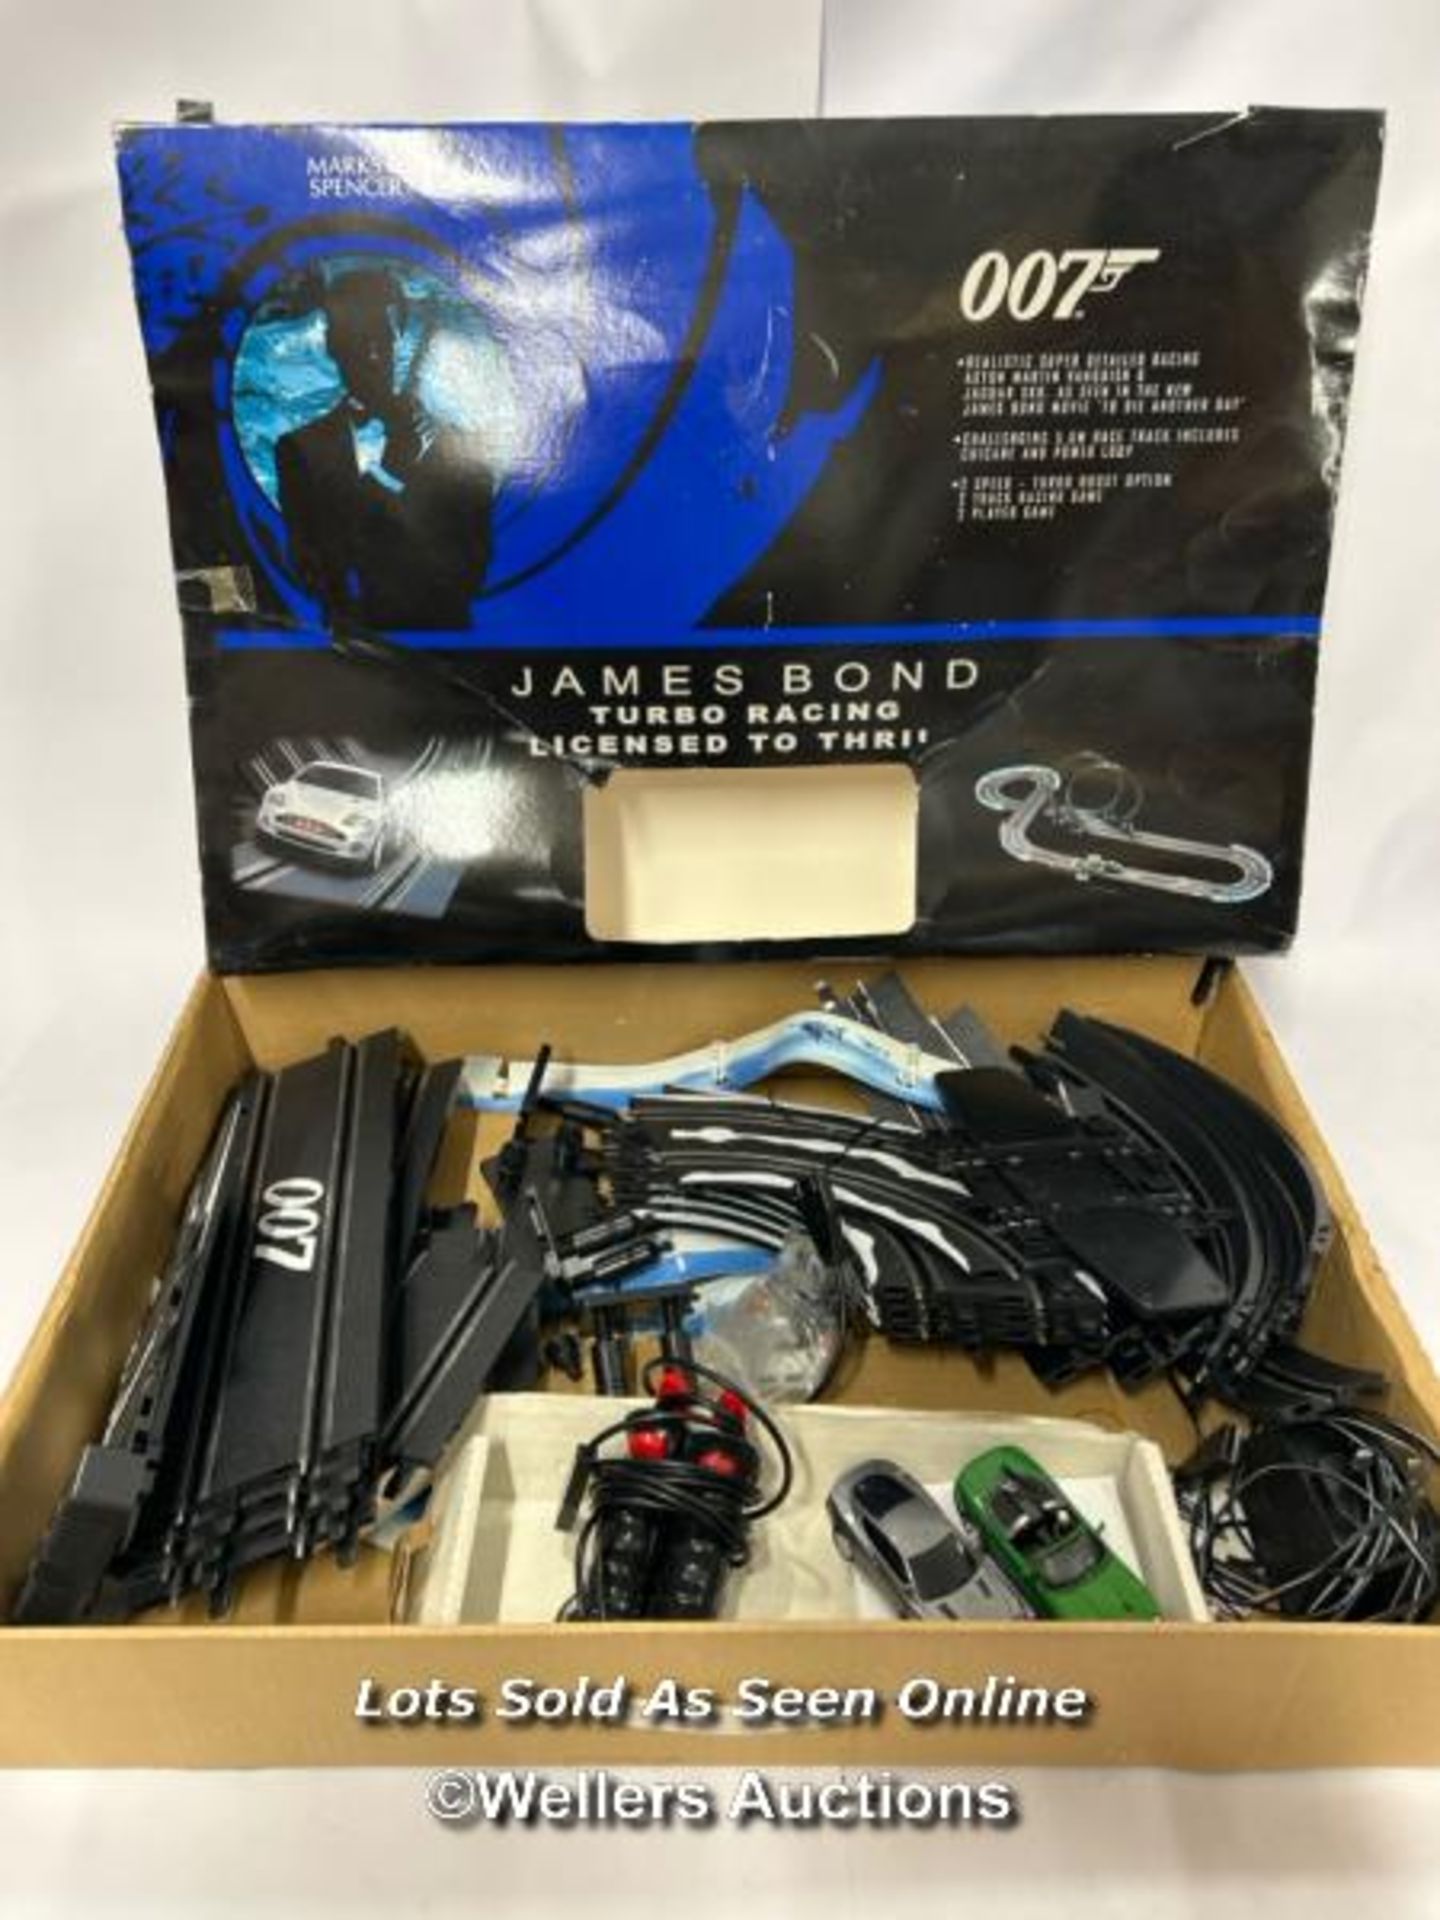 James Bond - Carrera turbo racing set, 2002, unchecked for completeness includes two cars / AN1